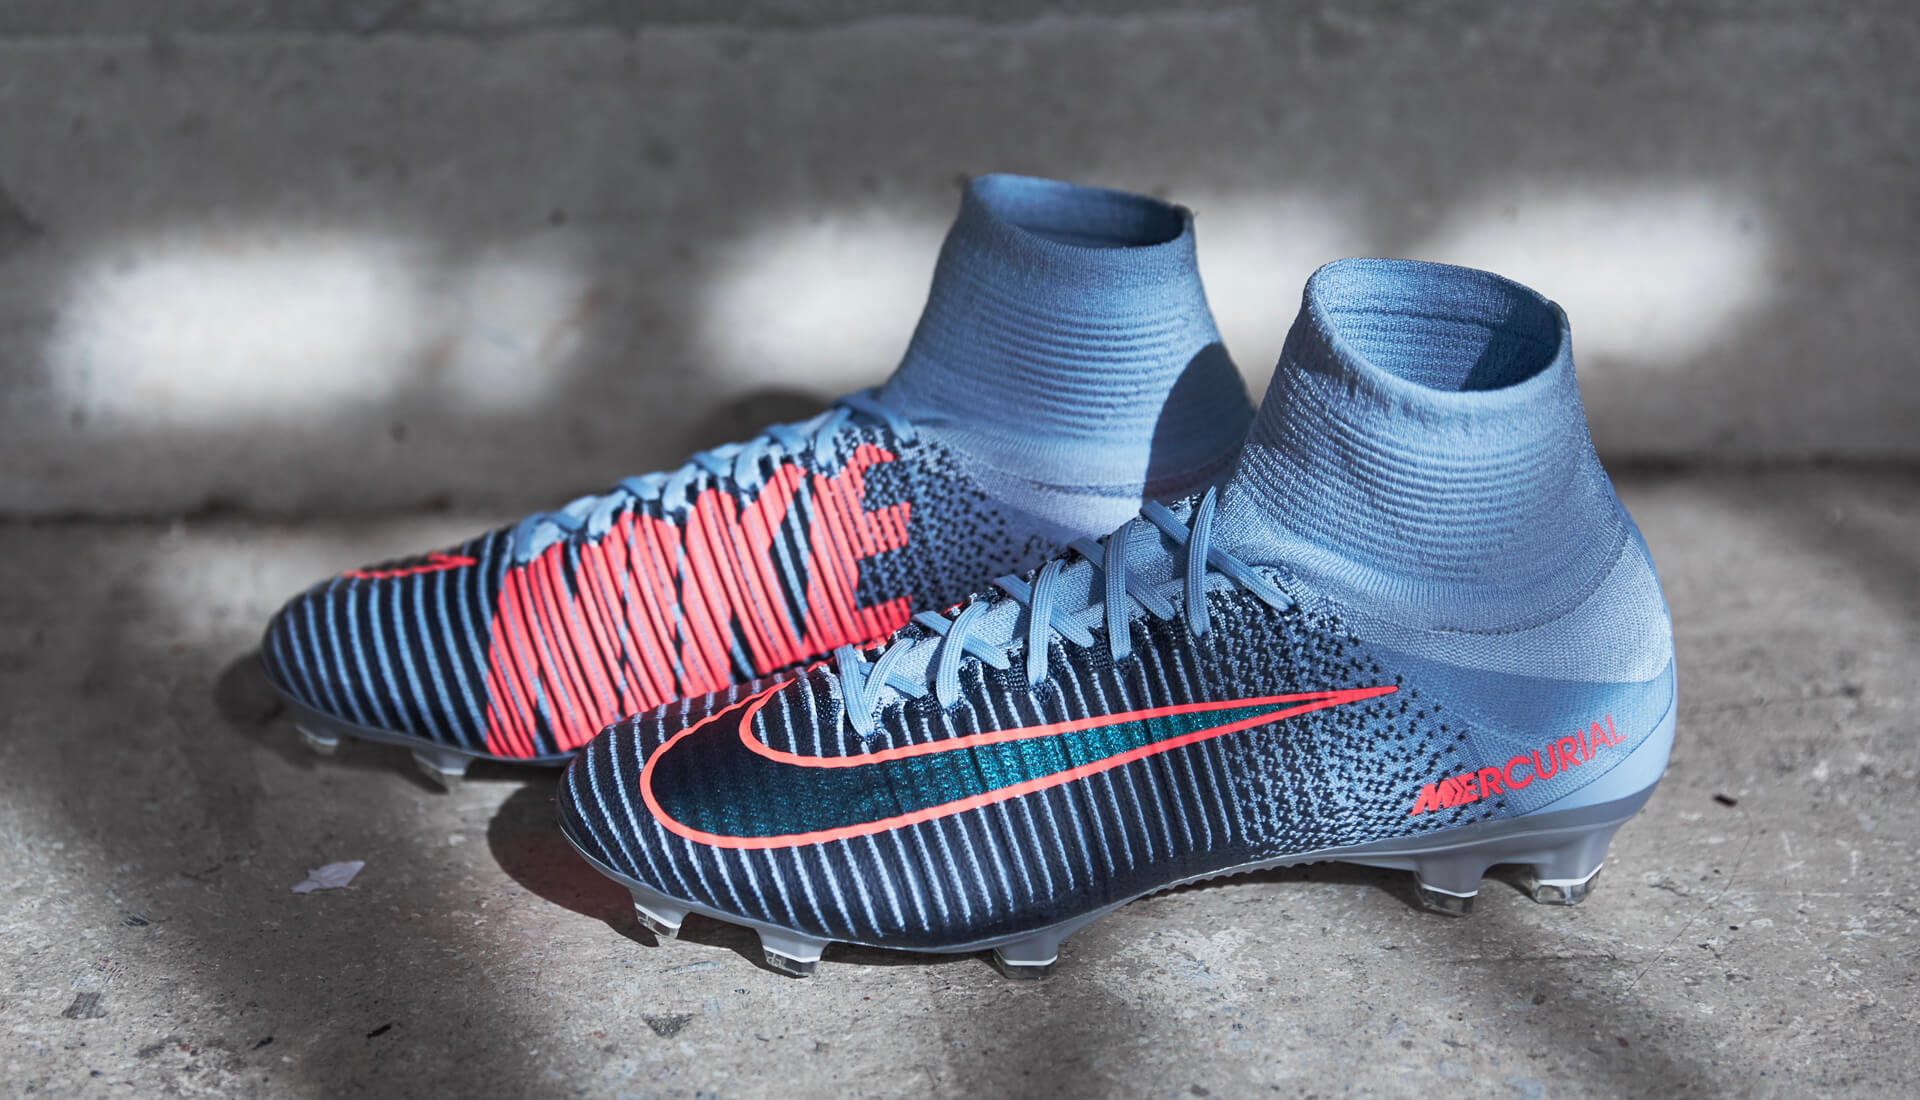 Nike Launch The Rising Fast Football Boot Pack - SoccerBible